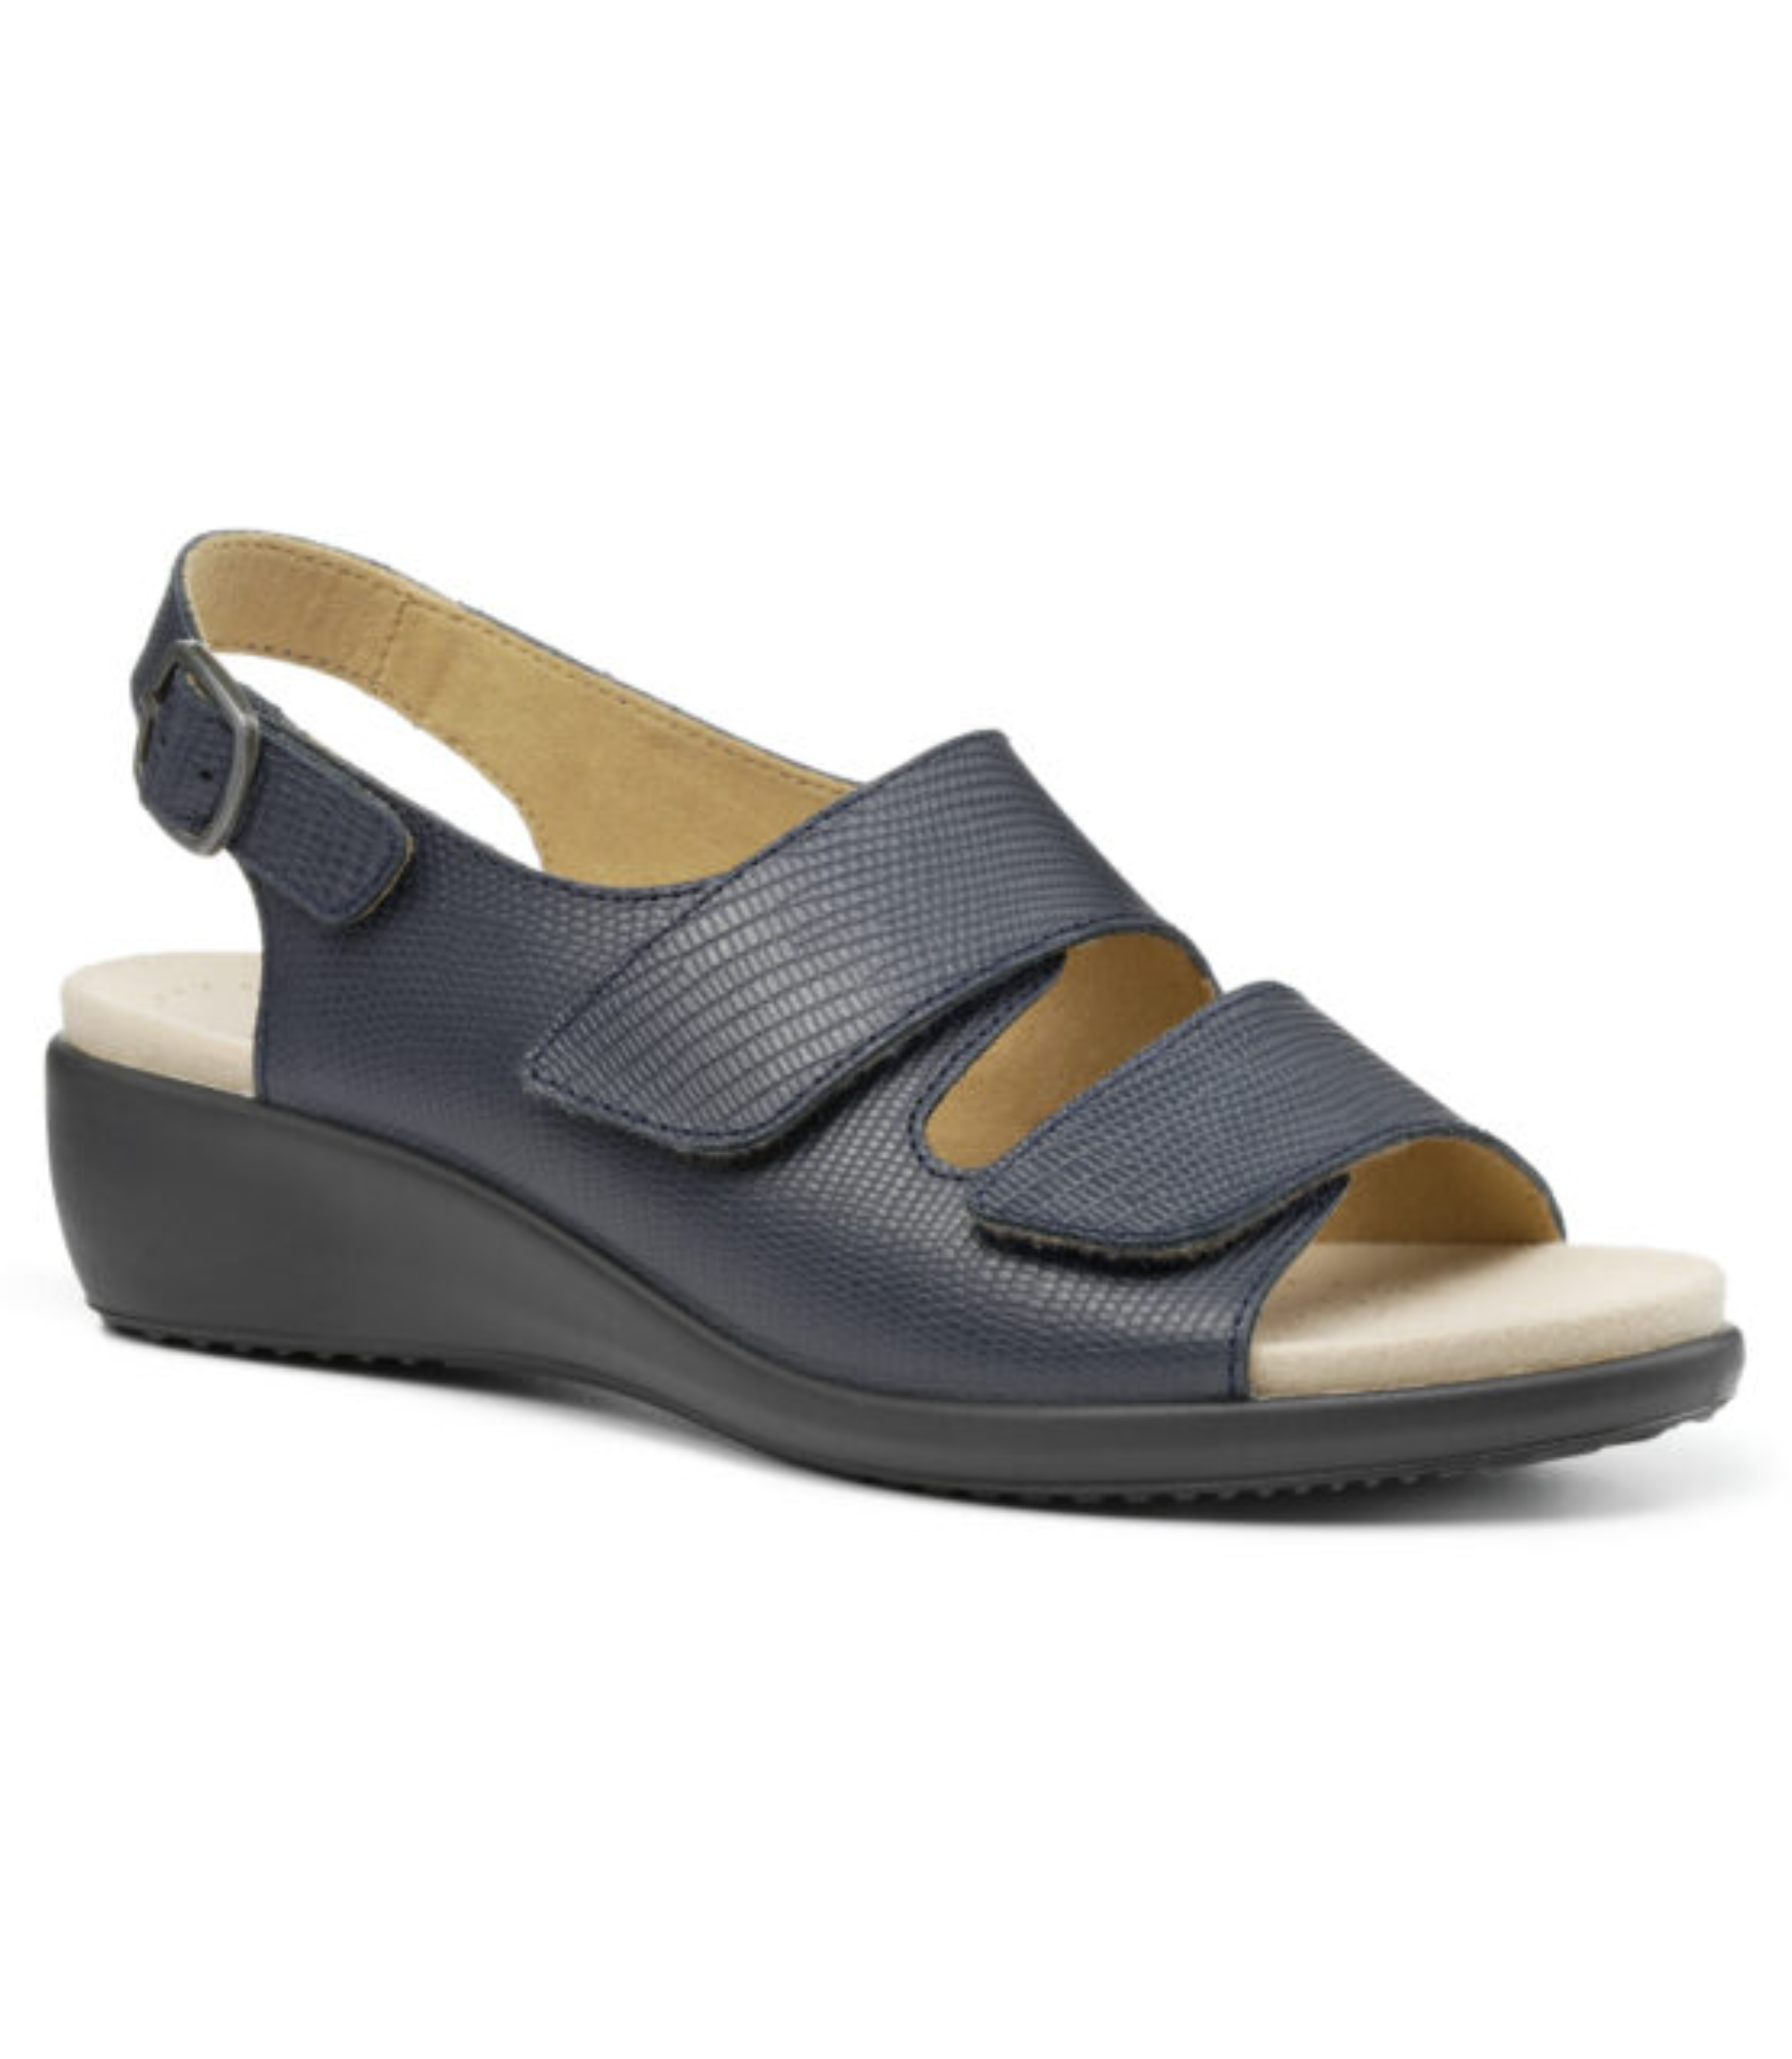 HOTTER NAVY EASY II SANDAY | Rosella - Style inspired by elegance